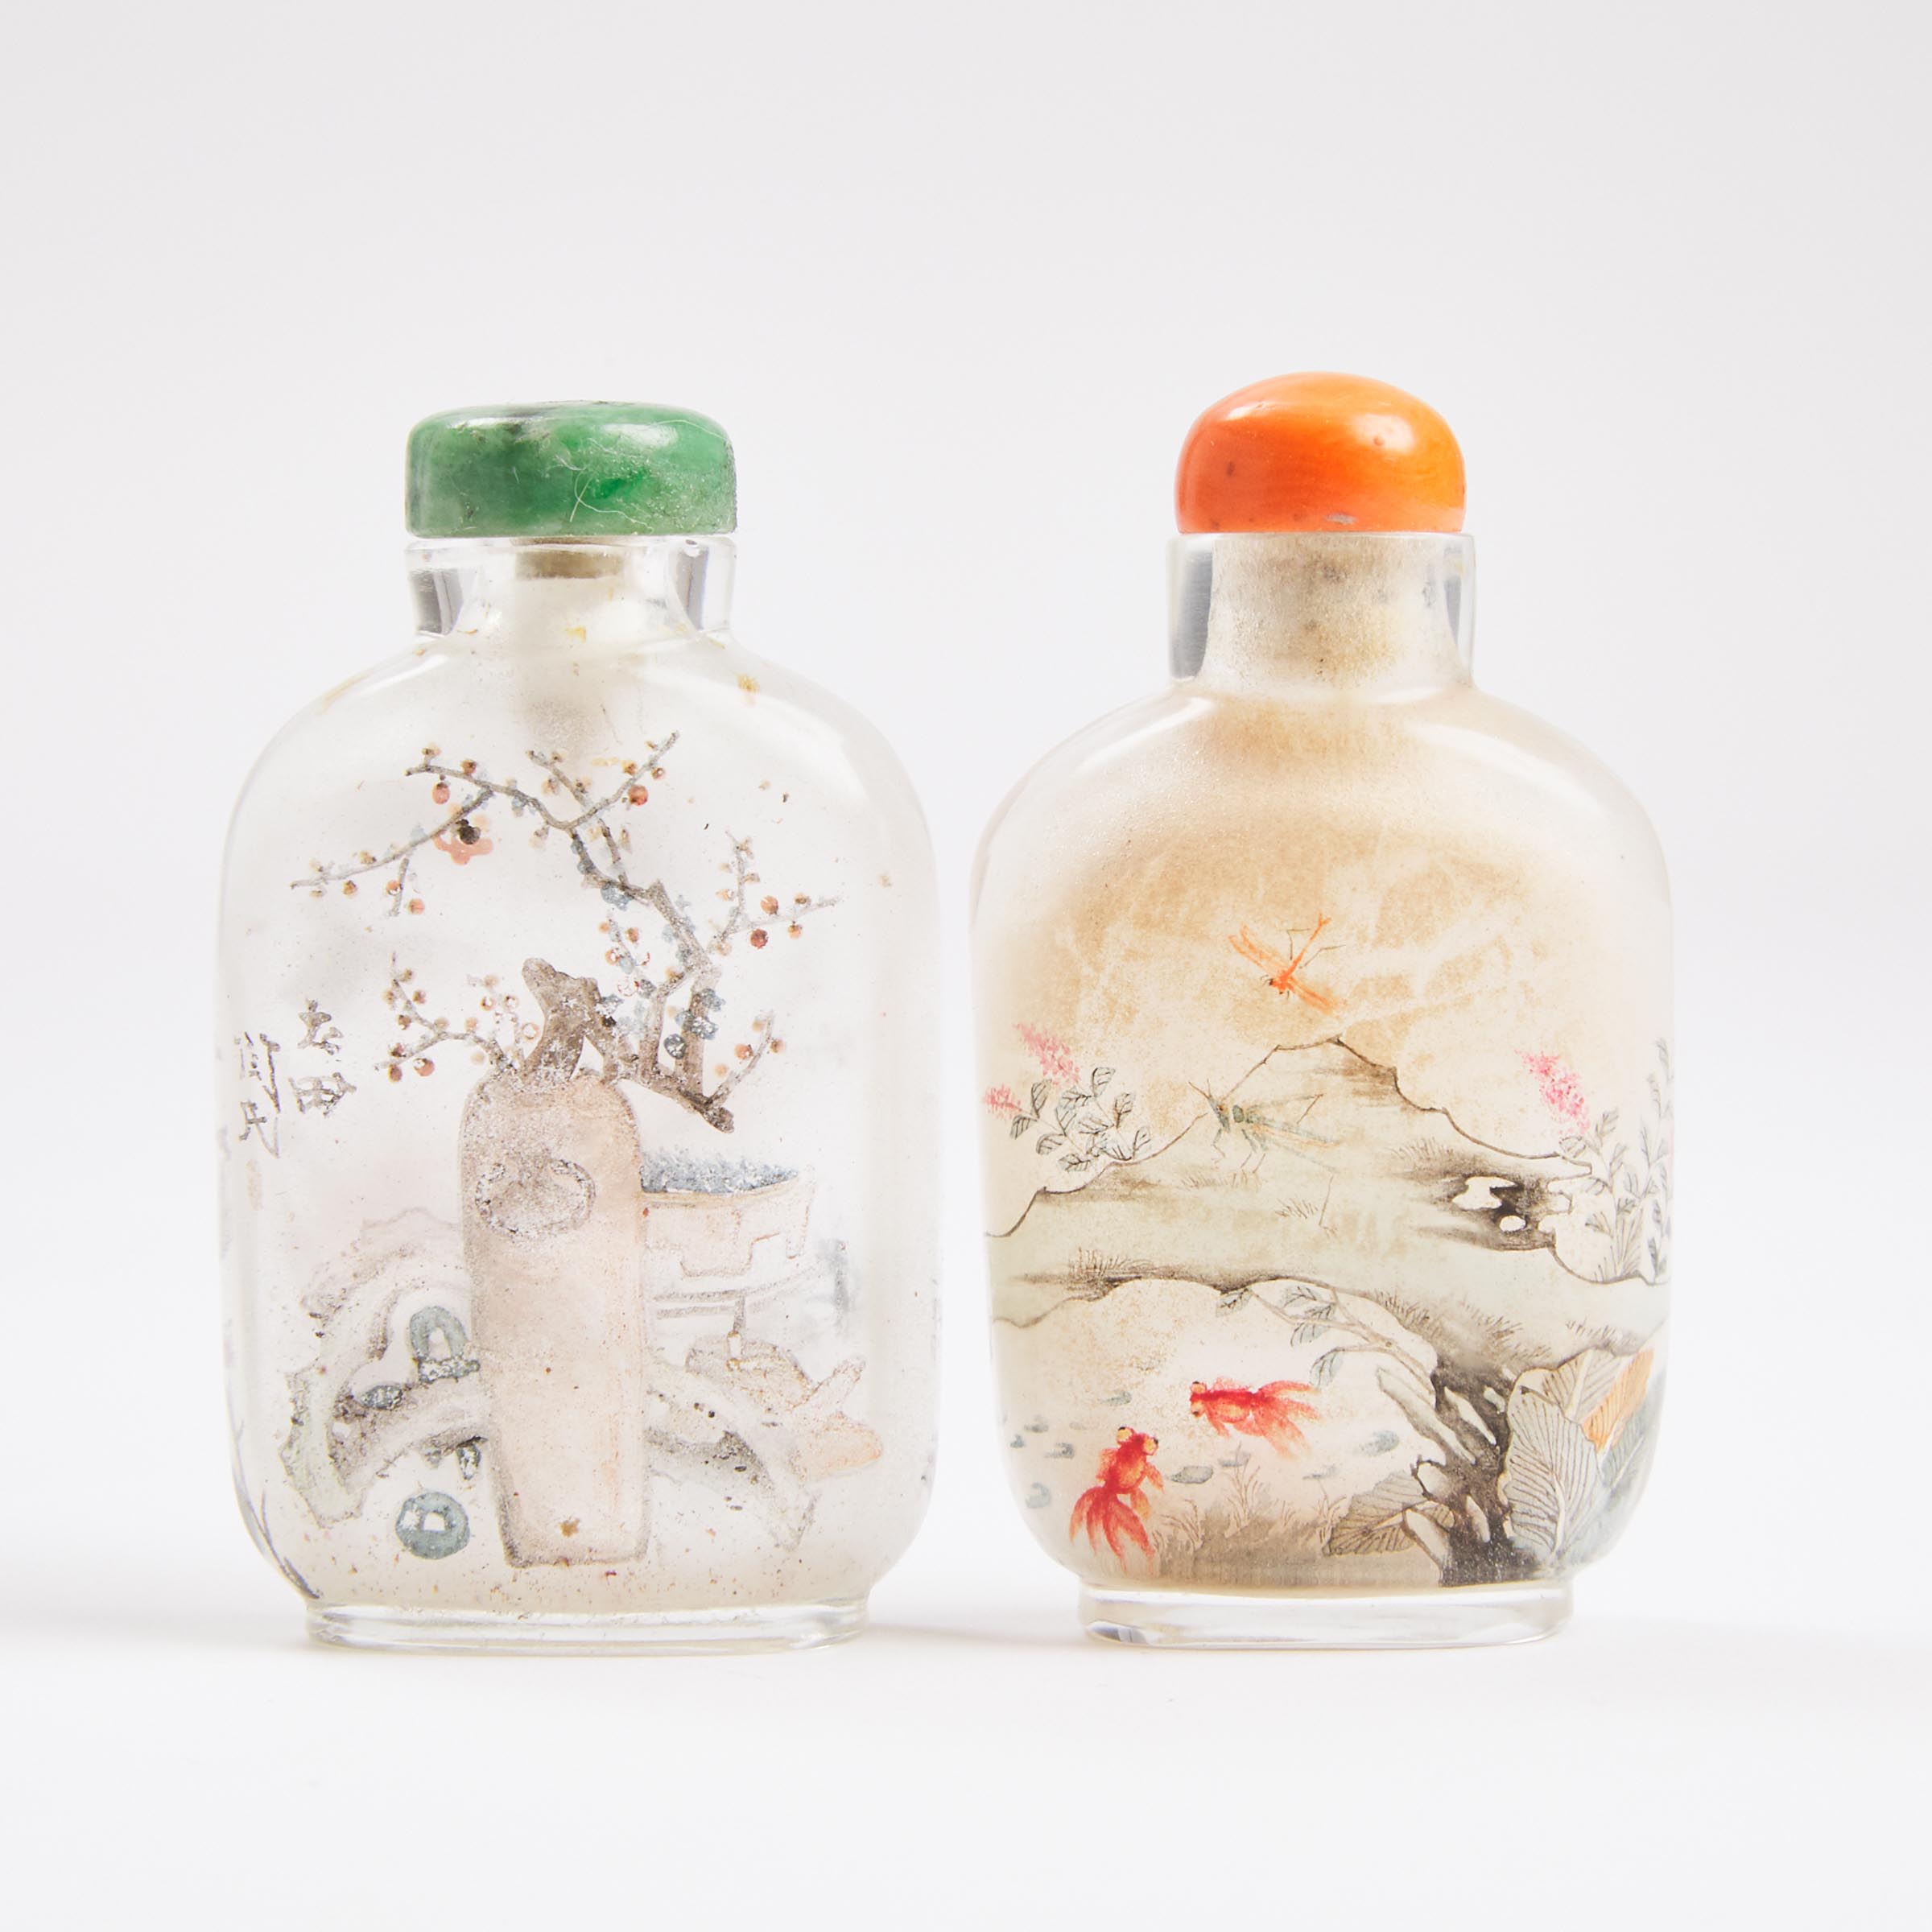 Two Inside-Painted Snuff Bottles, Signed Yan Yutian and Wang Simin, Circa 1900 and Later